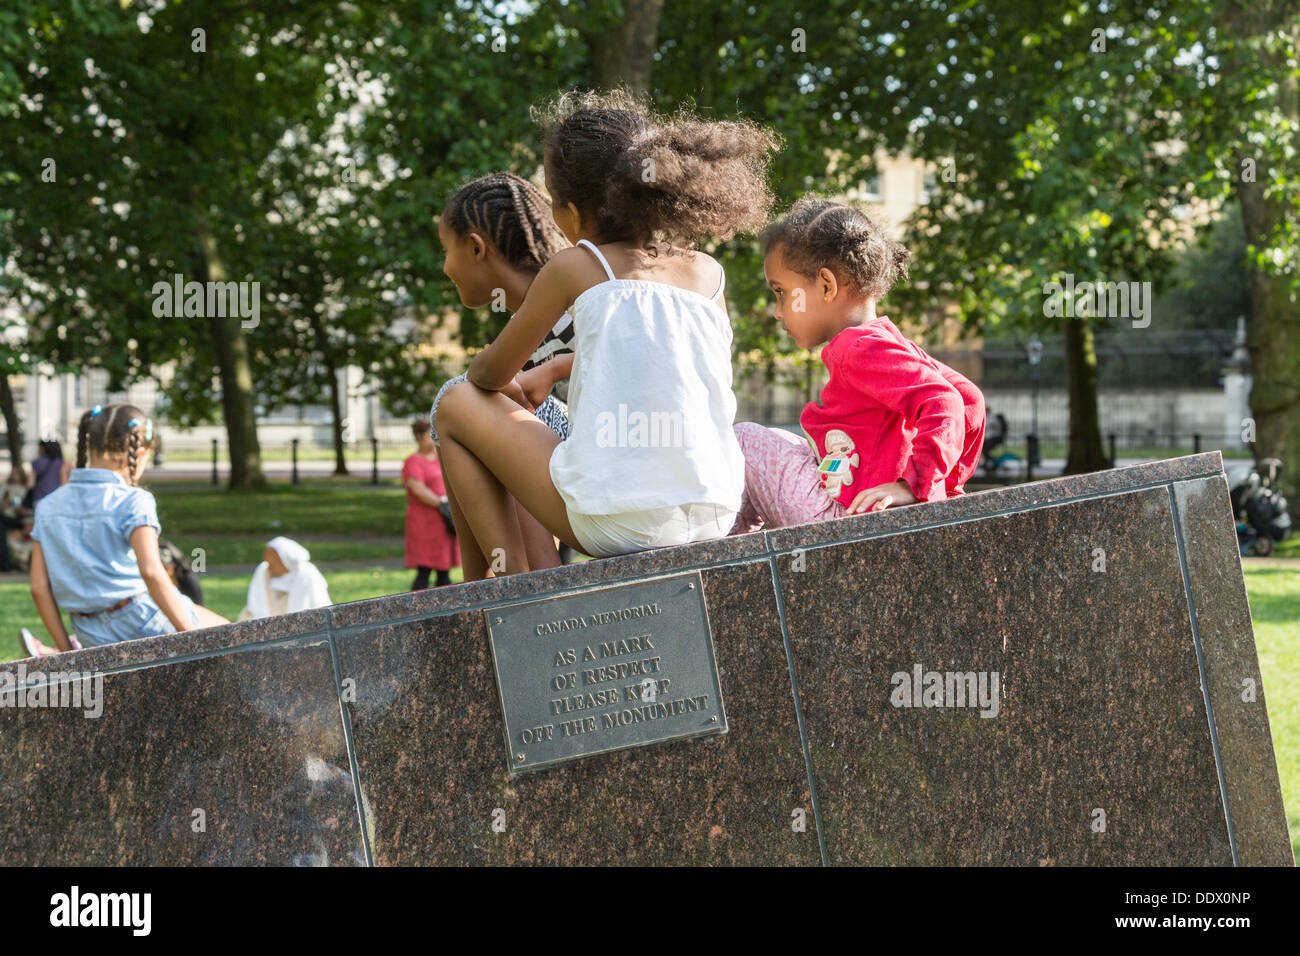 Canada Memorial, Green Park, London - children sitting above plaque reading: 'As a mark of respect please keep off the monument' Stock Photo